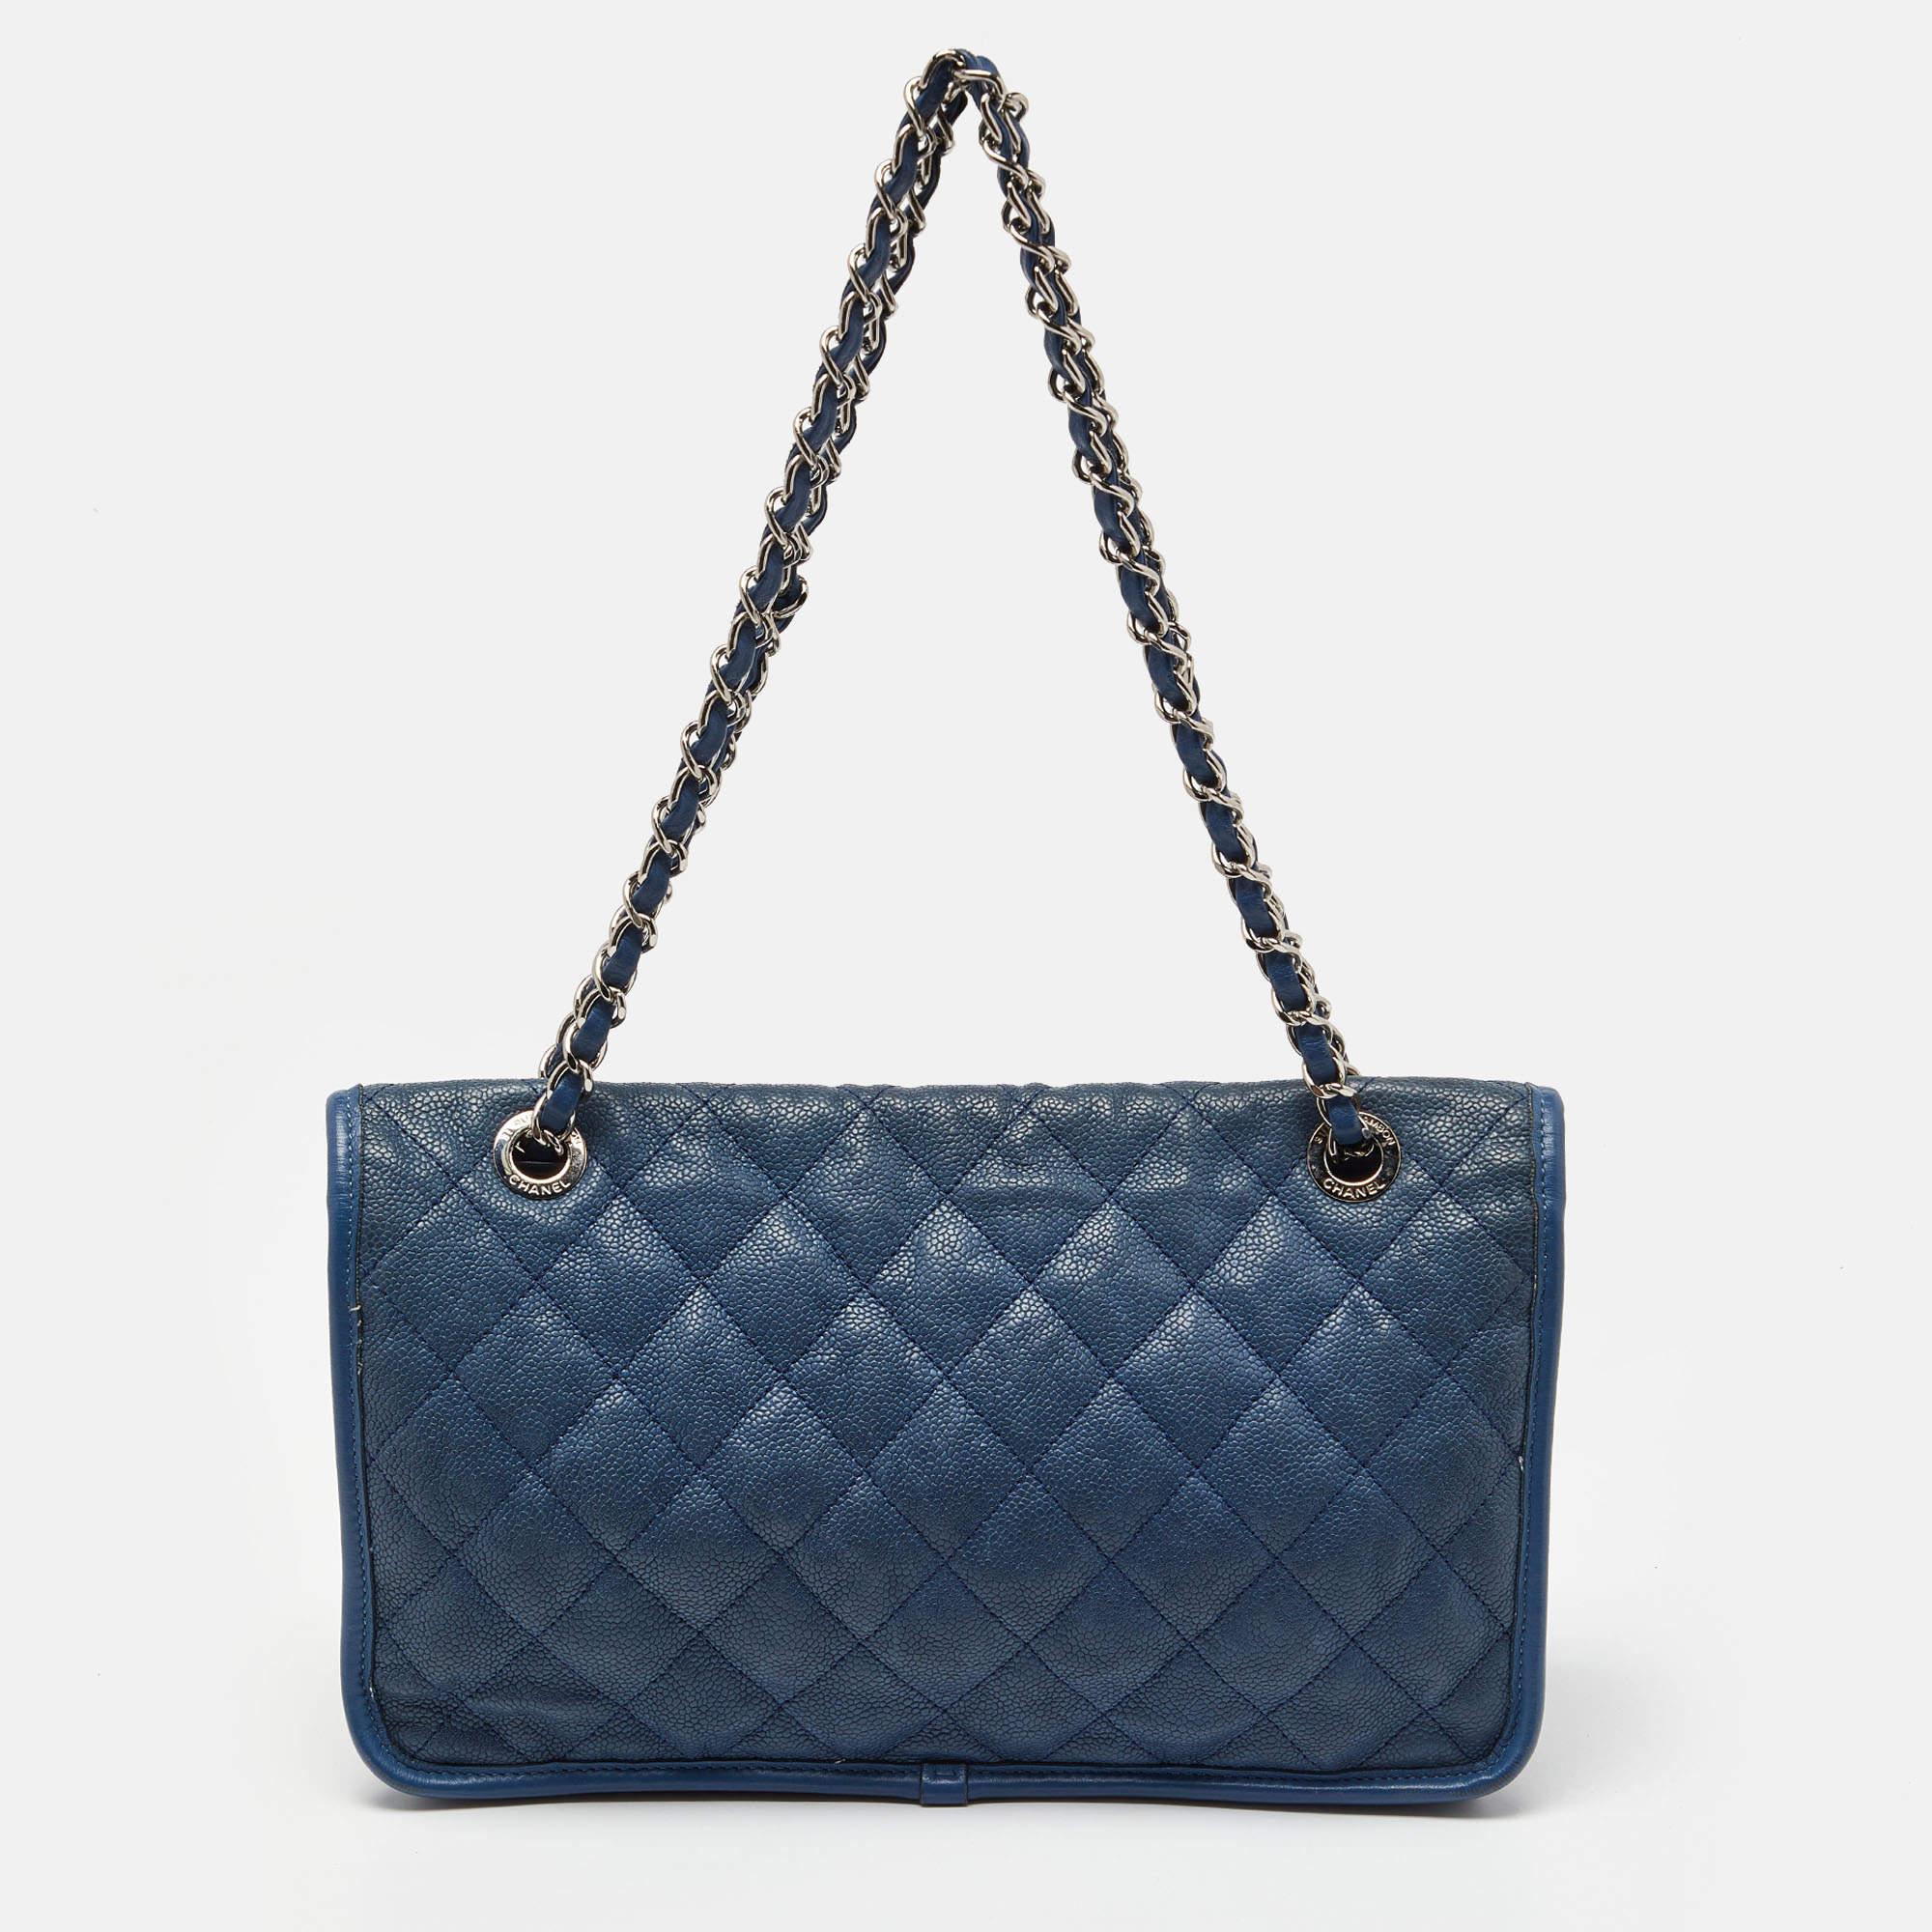 Women's Chanel Blue Quilted Caviar Leather CC French Riviera Flap Bag For Sale